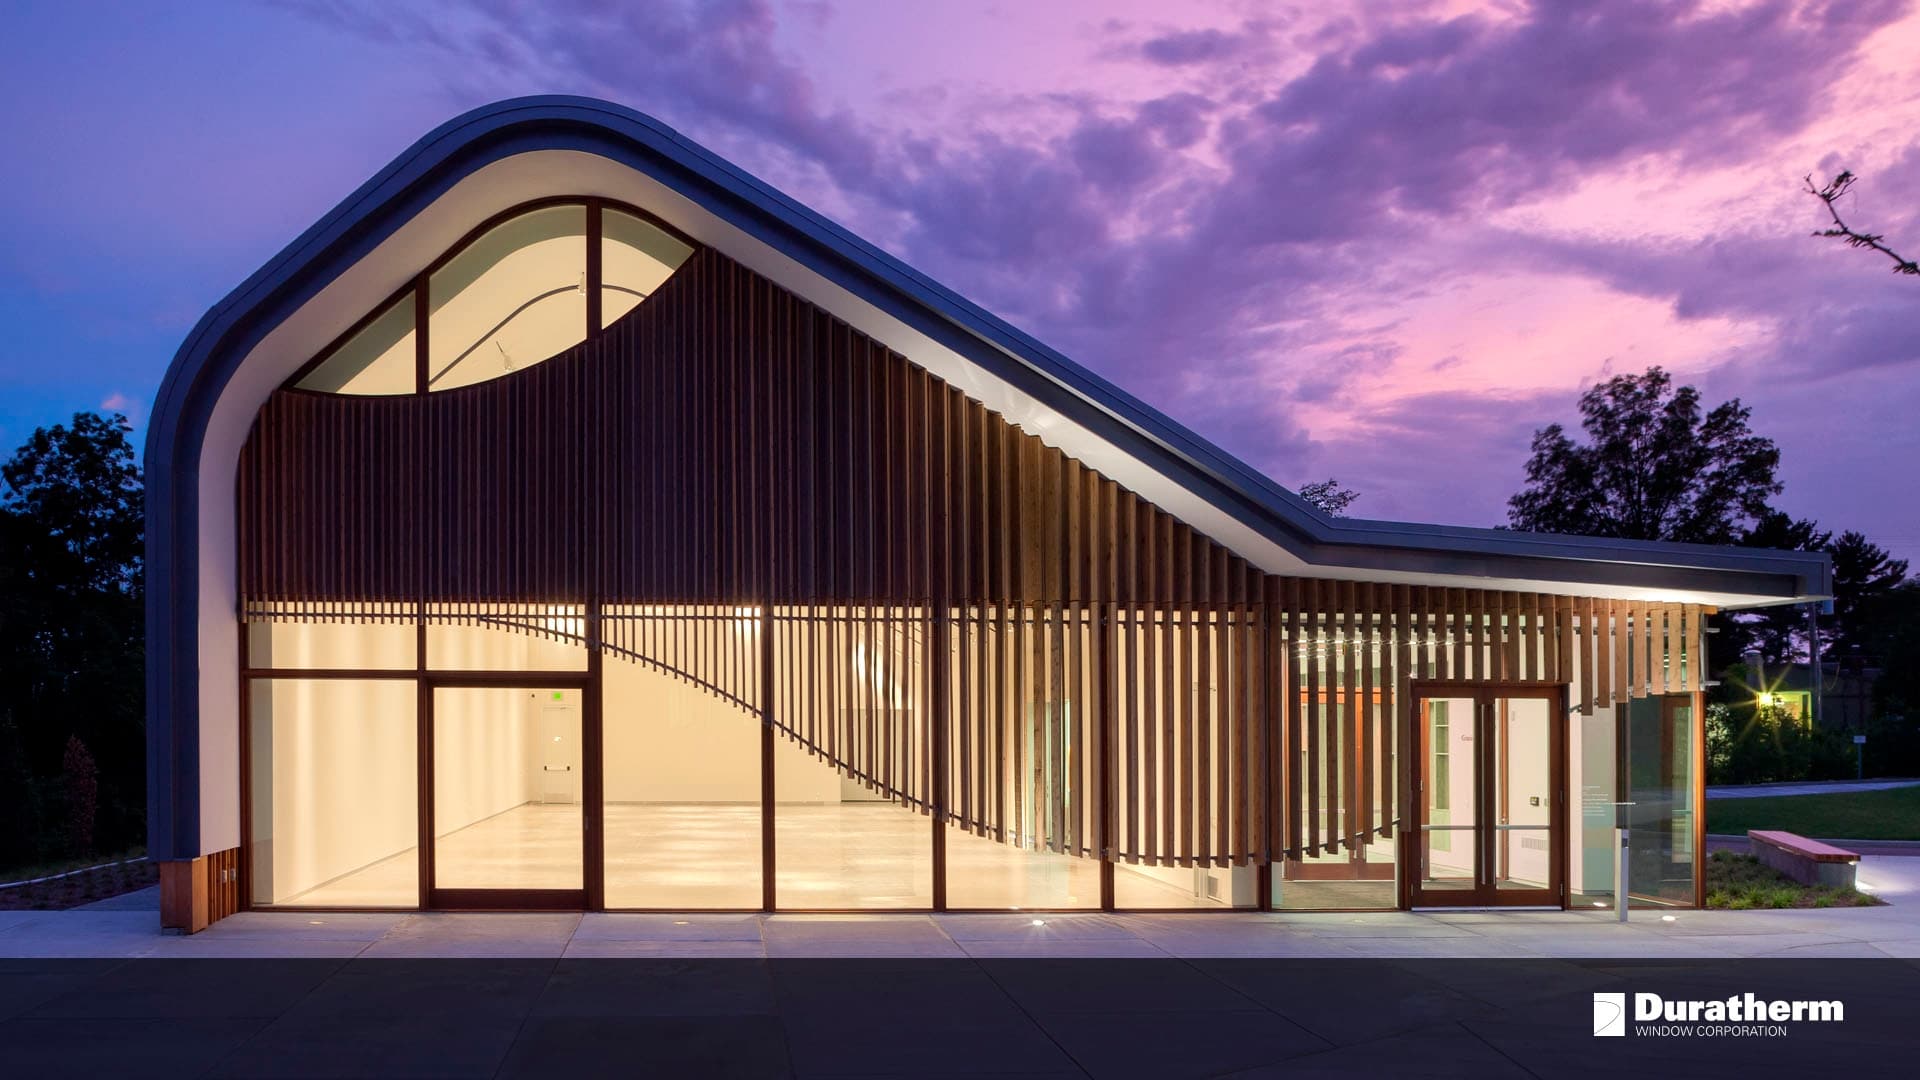 custom-designed arched building with wood accents and doors